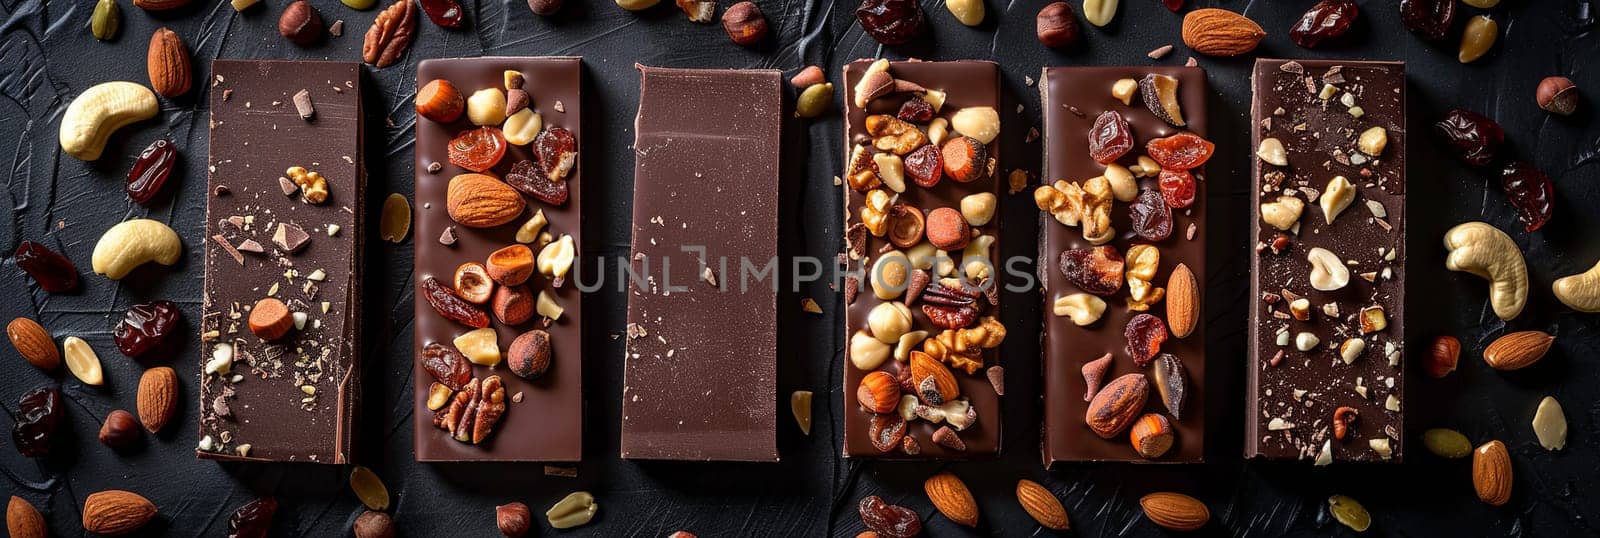 A row of chocolate bars topped with nuts and dried fruits, showcasing rich textures and natural ingredients.